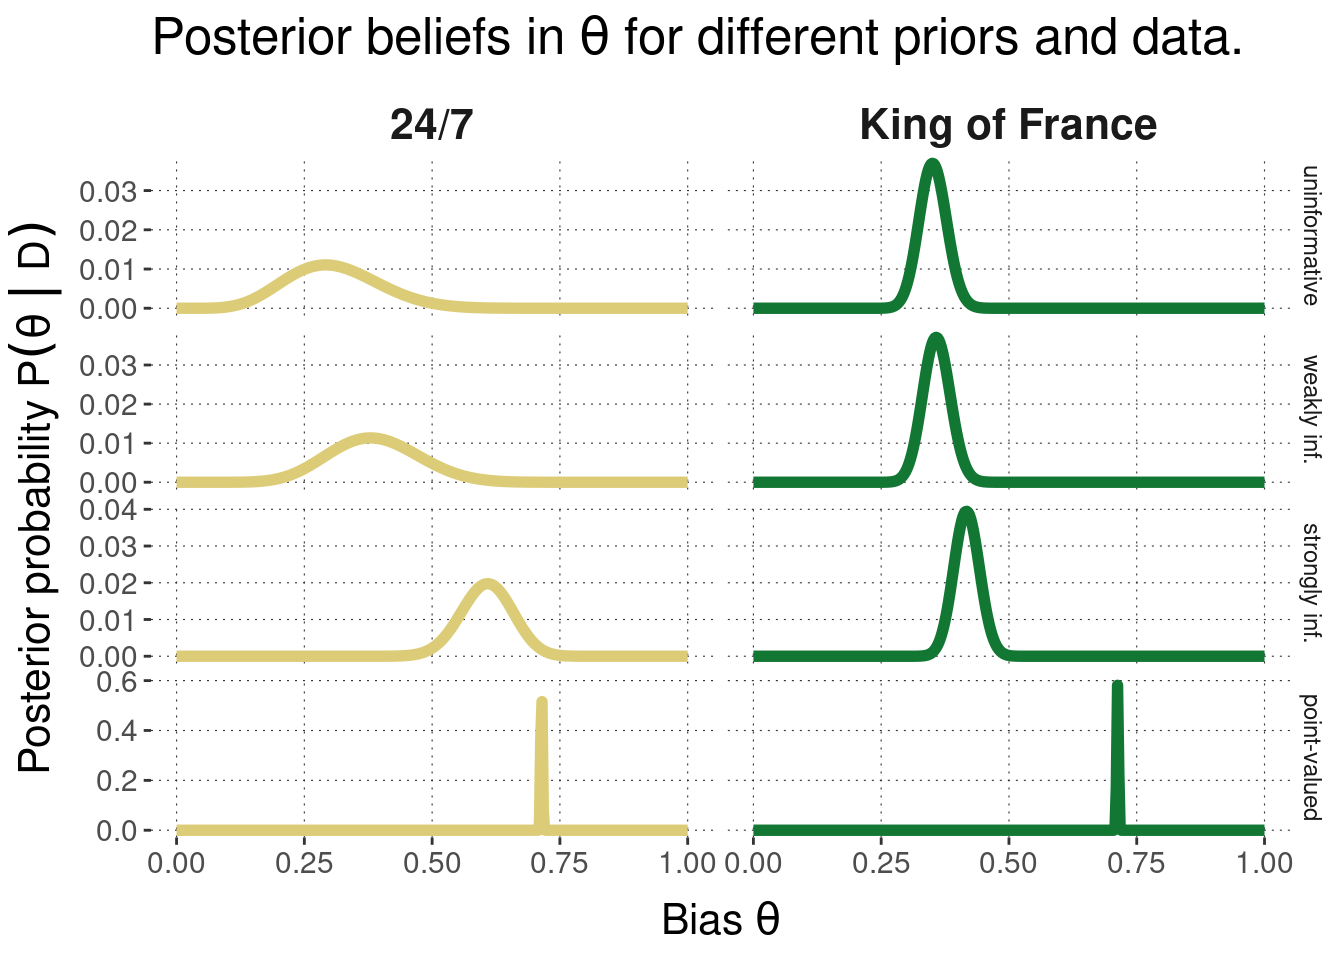 Posterior beliefs over bias parameter $\theta$ under different priors and different data sets. We see that strongly informative priors have more influence on the posterior than weakly informative priors, and that the influence of the prior is stronger for less data than for more.